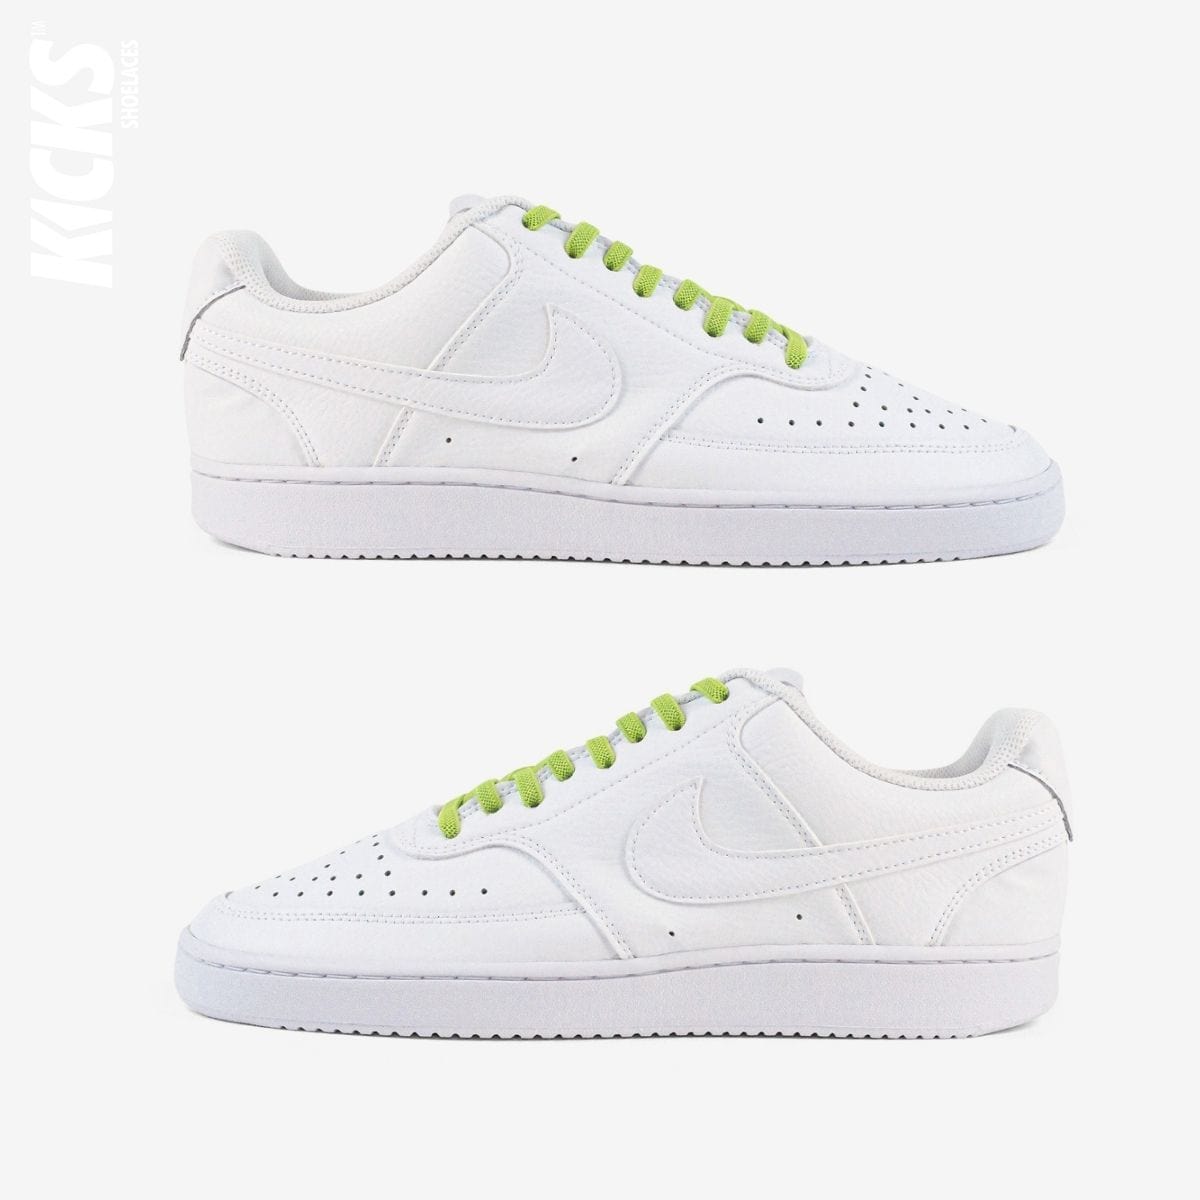 tieless-shoelaces-with-bright-green-laces-on-nike-white-sneakers-by-kicks-shoelaces